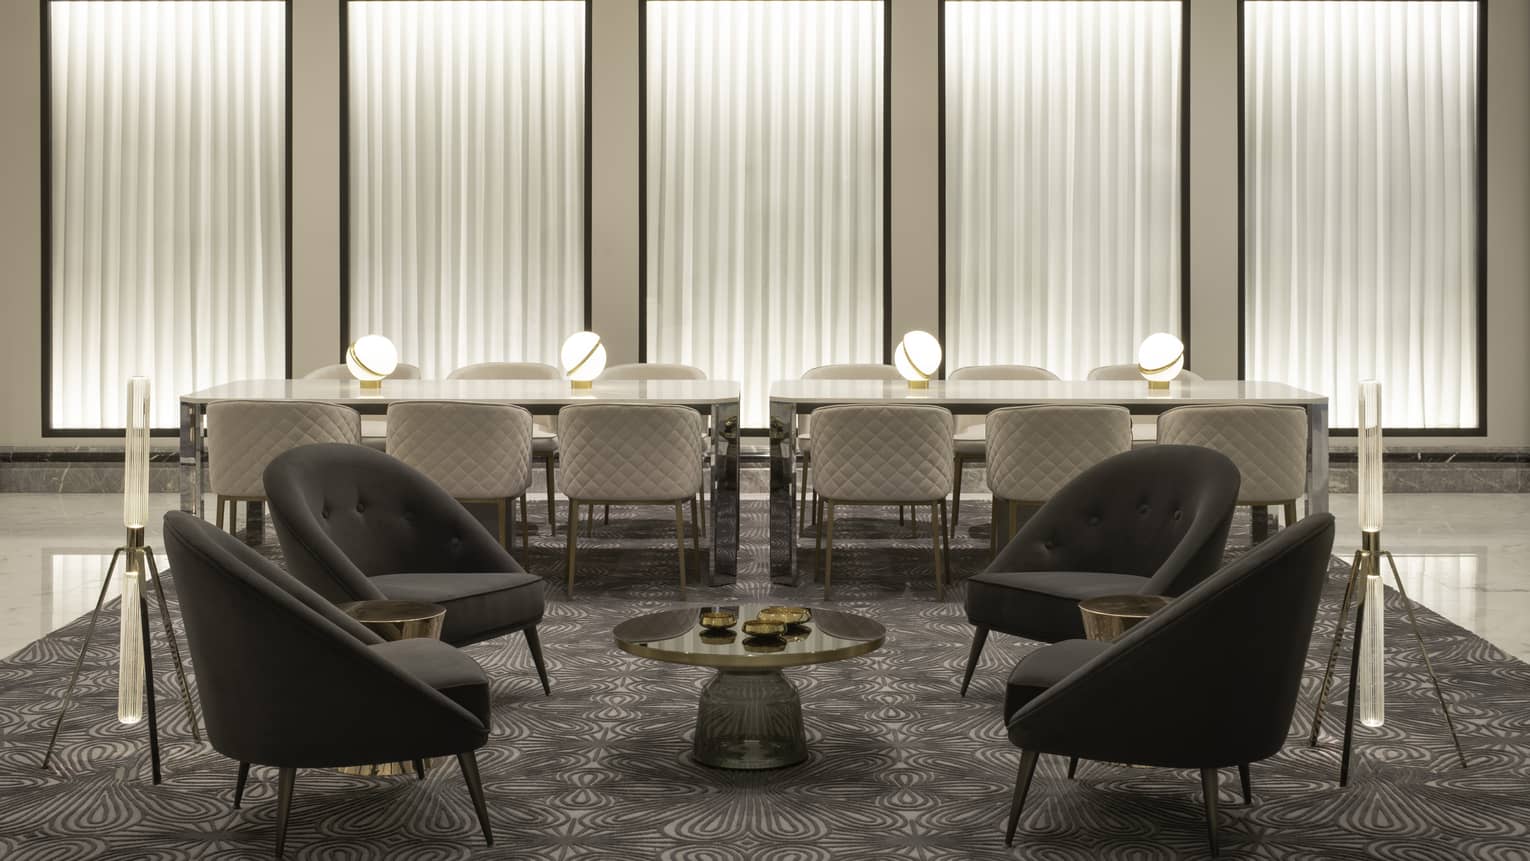 Another sitting area in the lounge, featuring a casual area and two tables that can seat six people each.